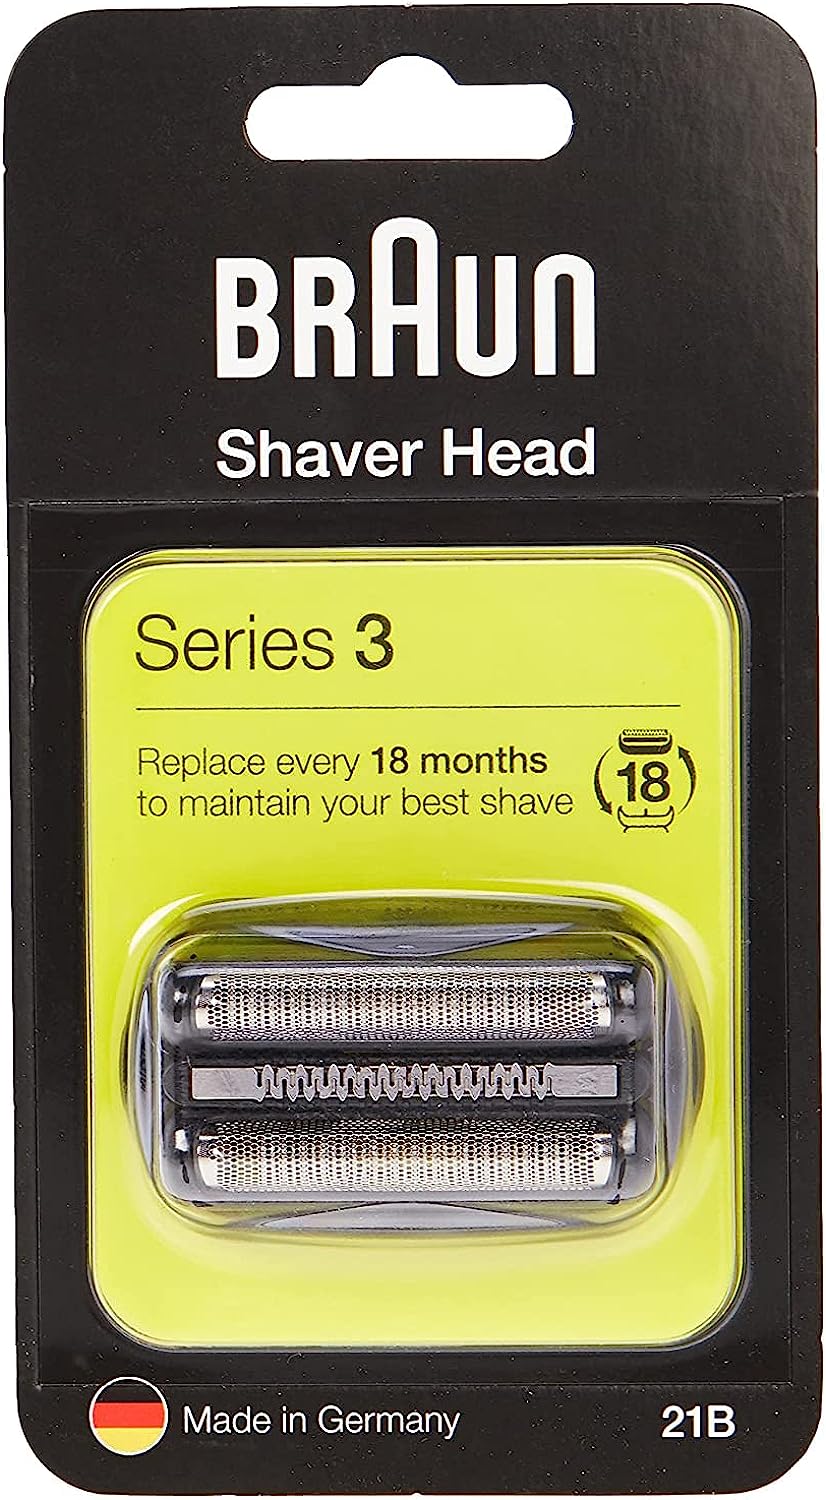 Braun 21B Series 3 Electric Shaver Replacement Foil and Cassette Cartridge - Black